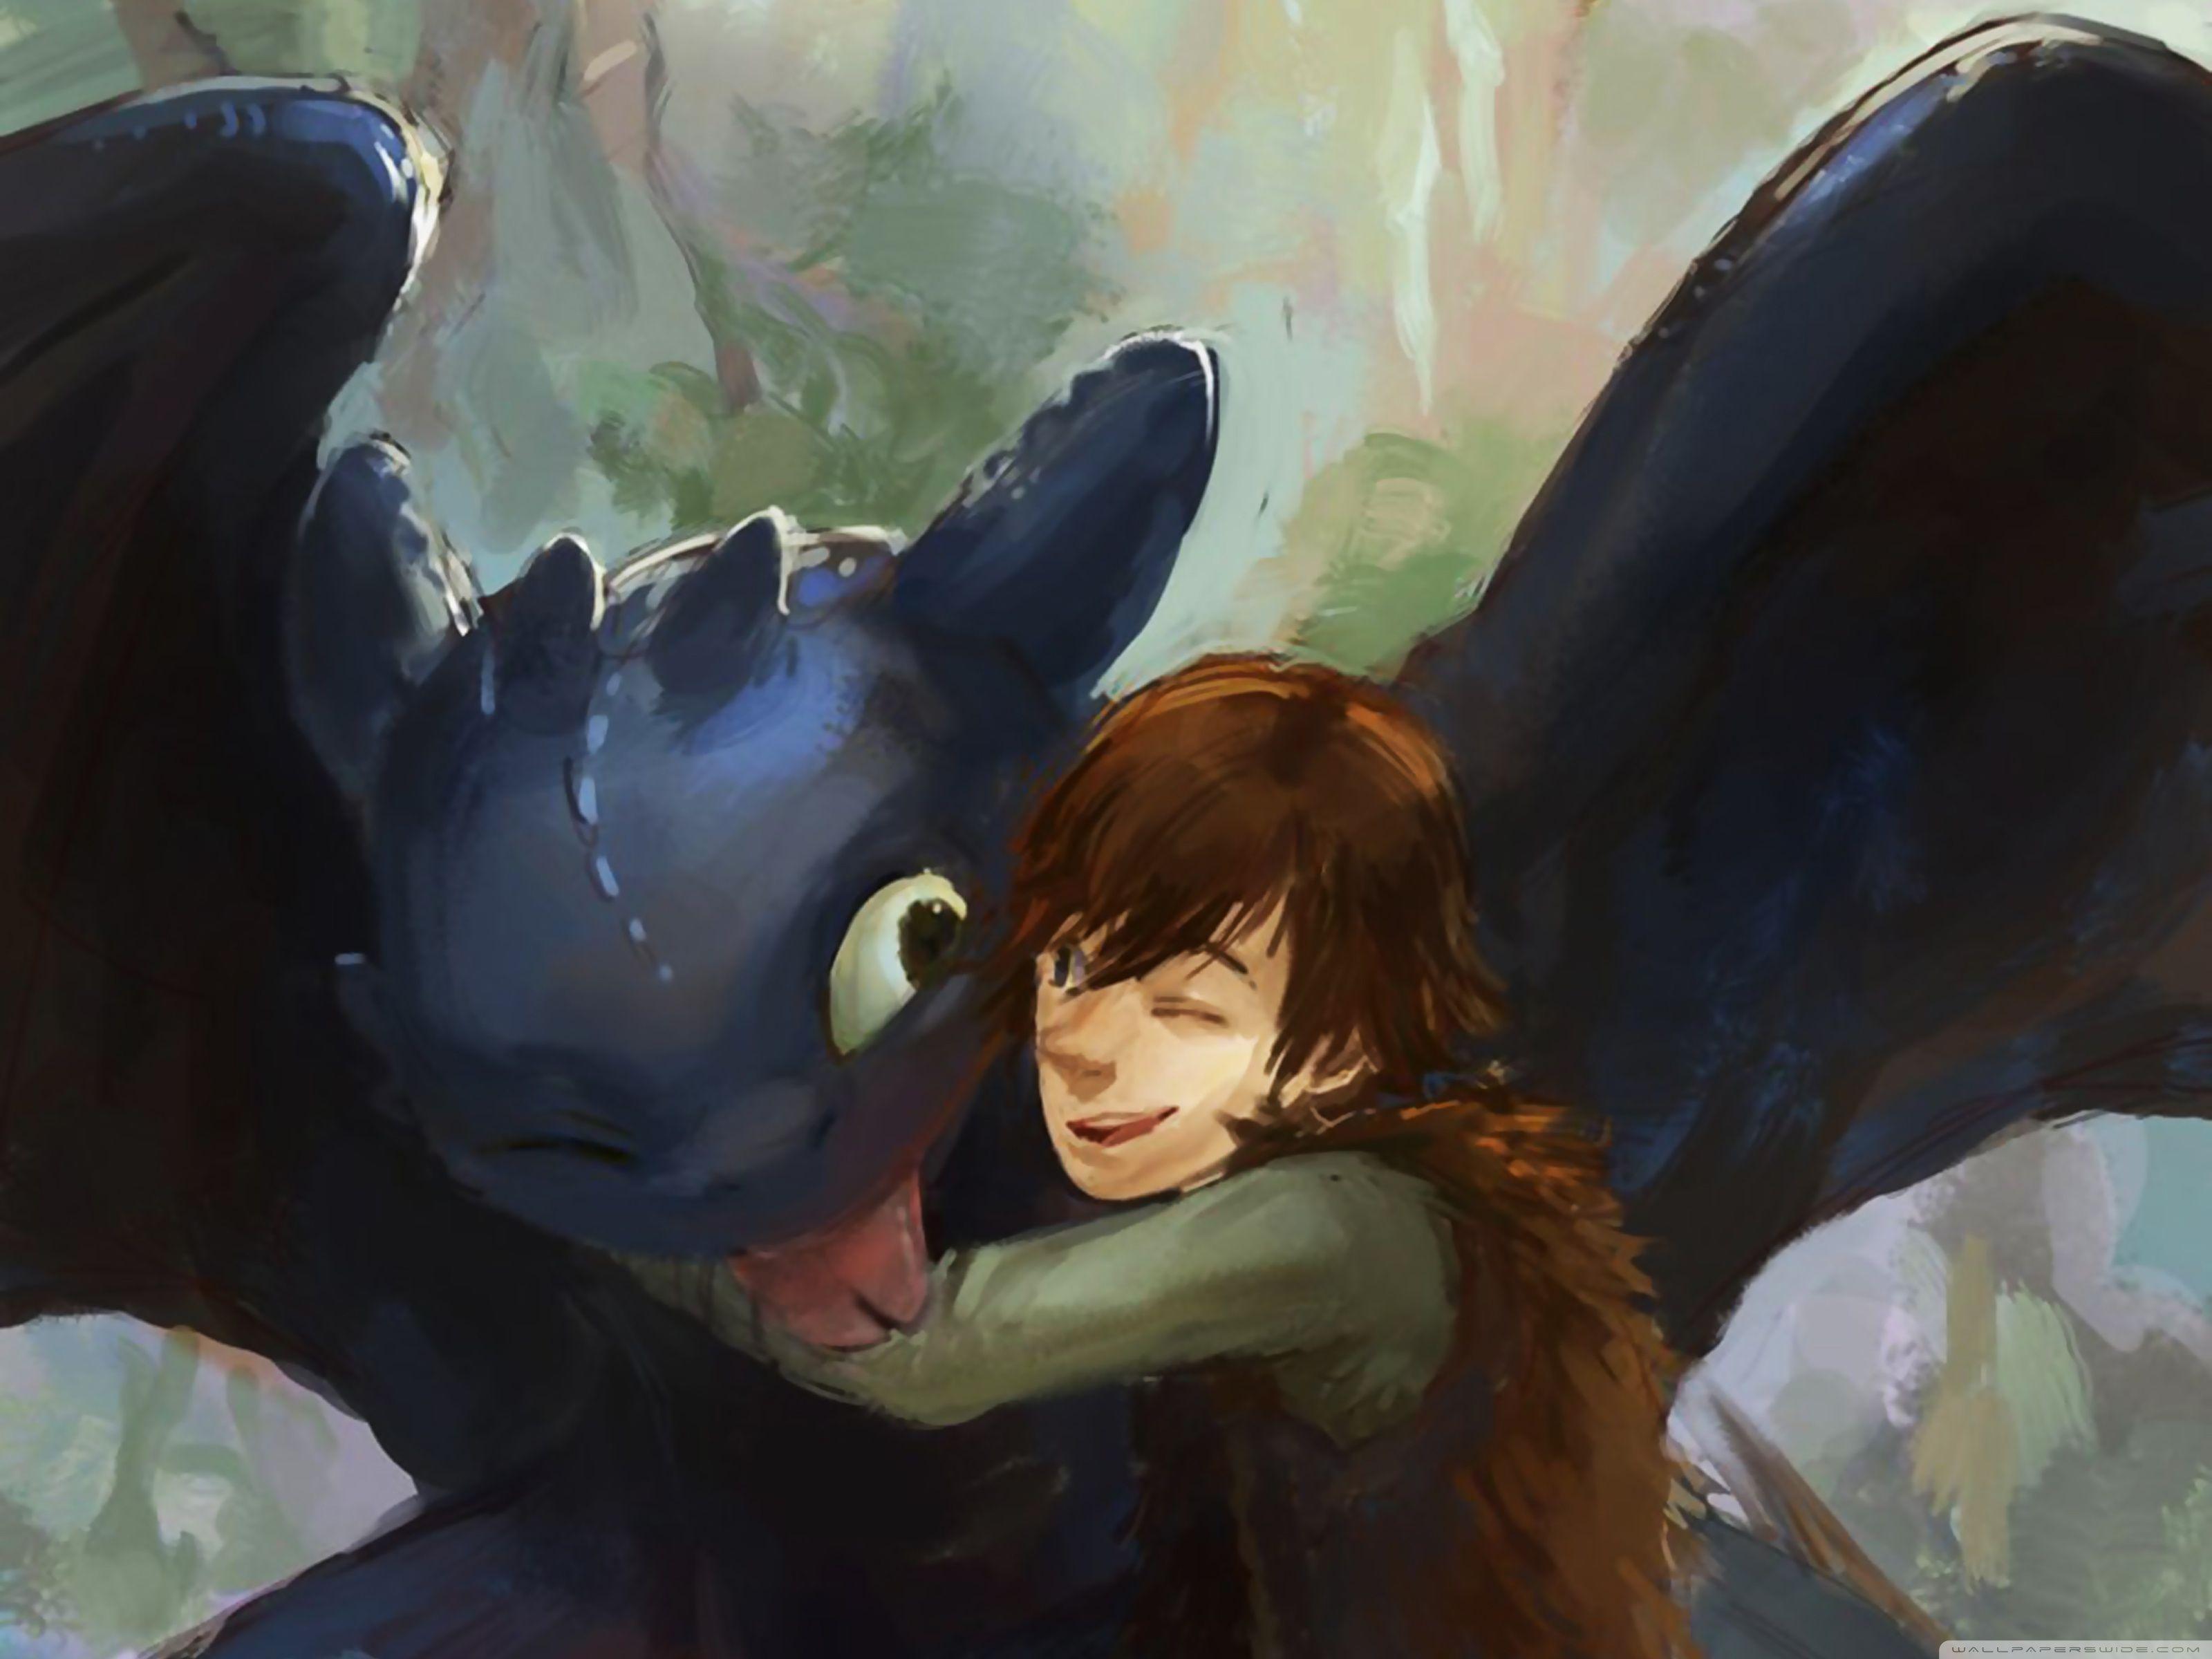 How To Train Your Dragon 3 Wallpapers - Wallpaper Cave